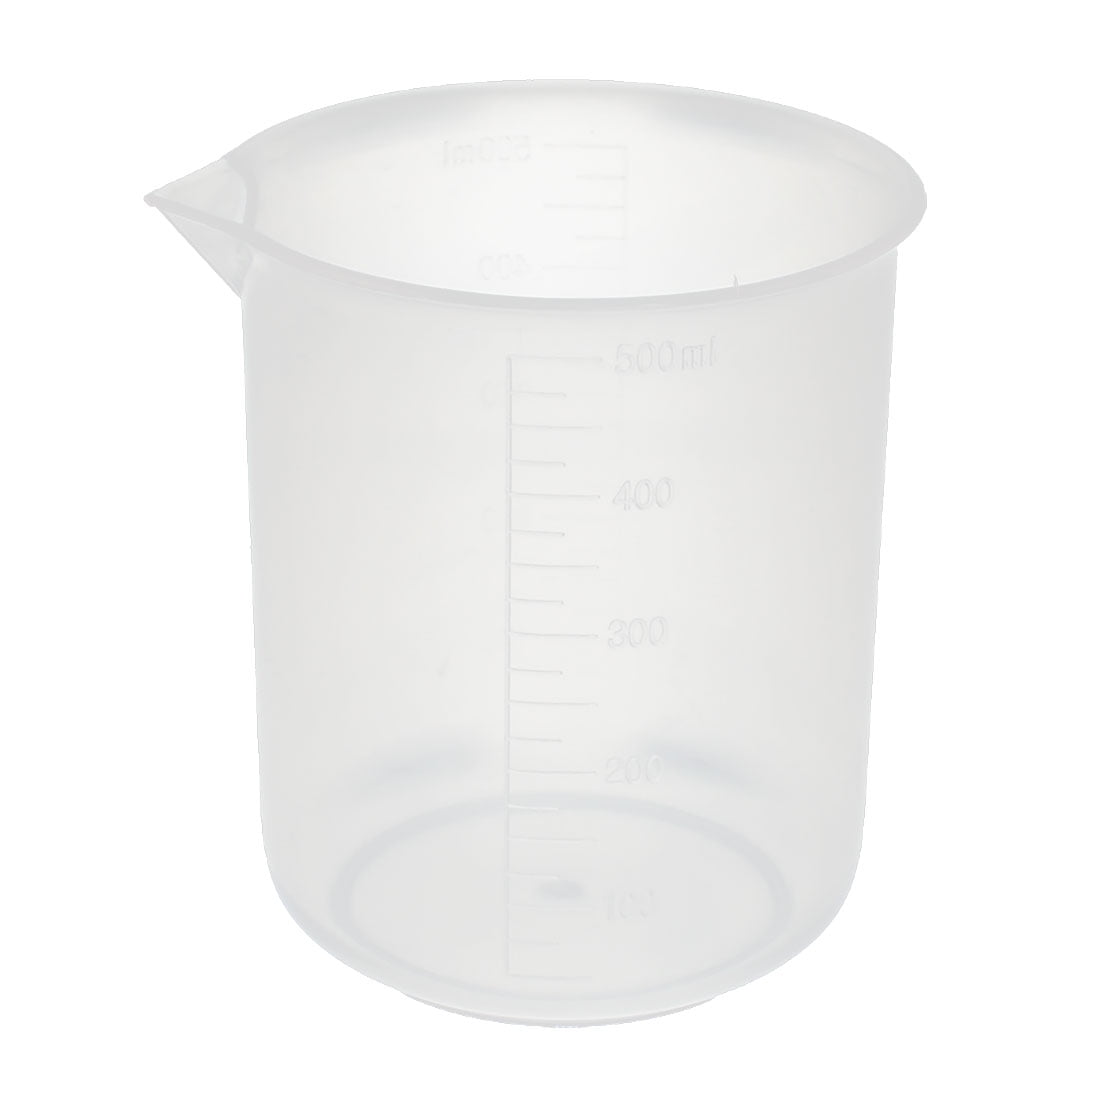 Details about   Plastic Measuring Cup Scale Clear Beaker Graduated Chemical Experiment Lab Jug 